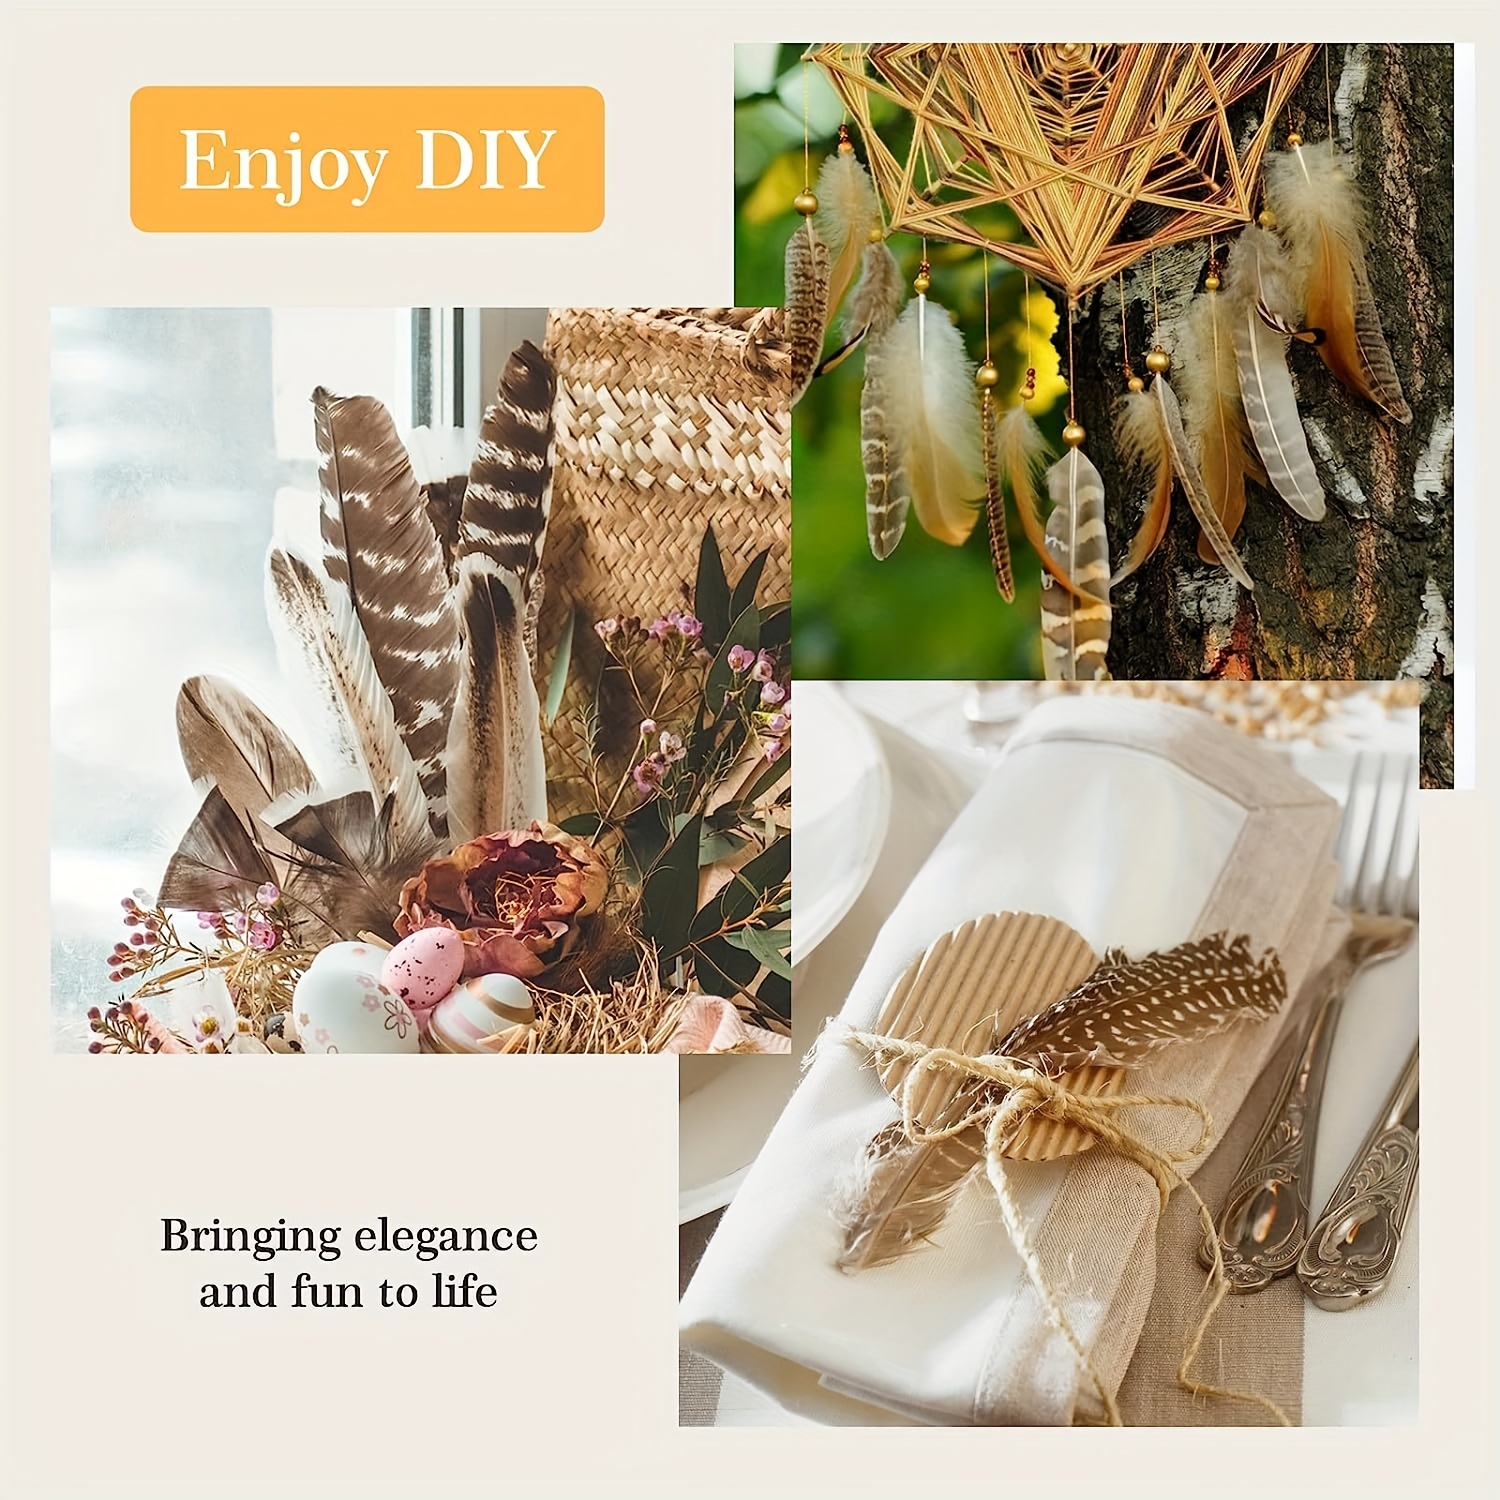 iHUFeather 20pcs Natural Pheasant Feathers Female Tails Feathers 6-8inch  for DIY Crafts Wedding Party Centerpieces Christmas Home Decoration  6-8Inch-20pcs Female